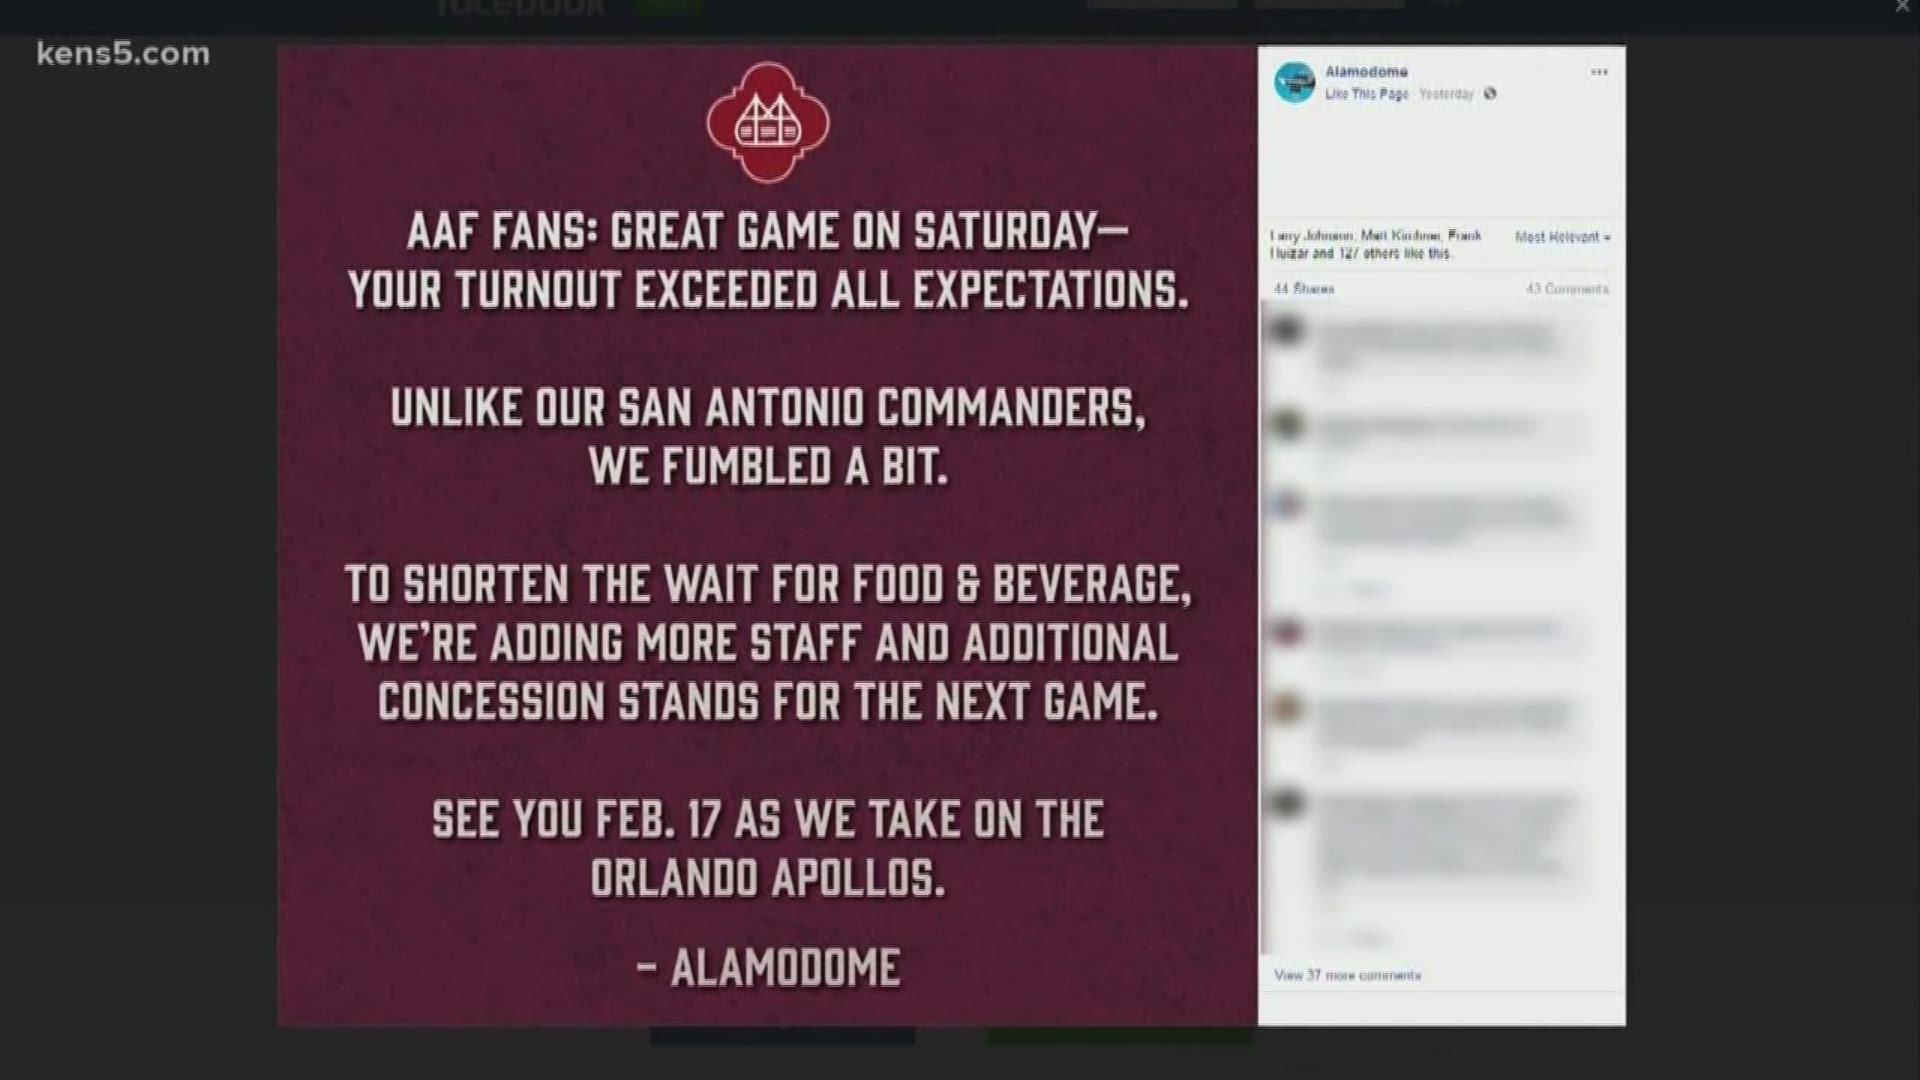 On Saturday, some fans had to miss big chunks of the game as they waited in line. Others just skipped eating and drinking altogether to avoid the wait. The Commanders play inside the Alamodome again this Sunday.